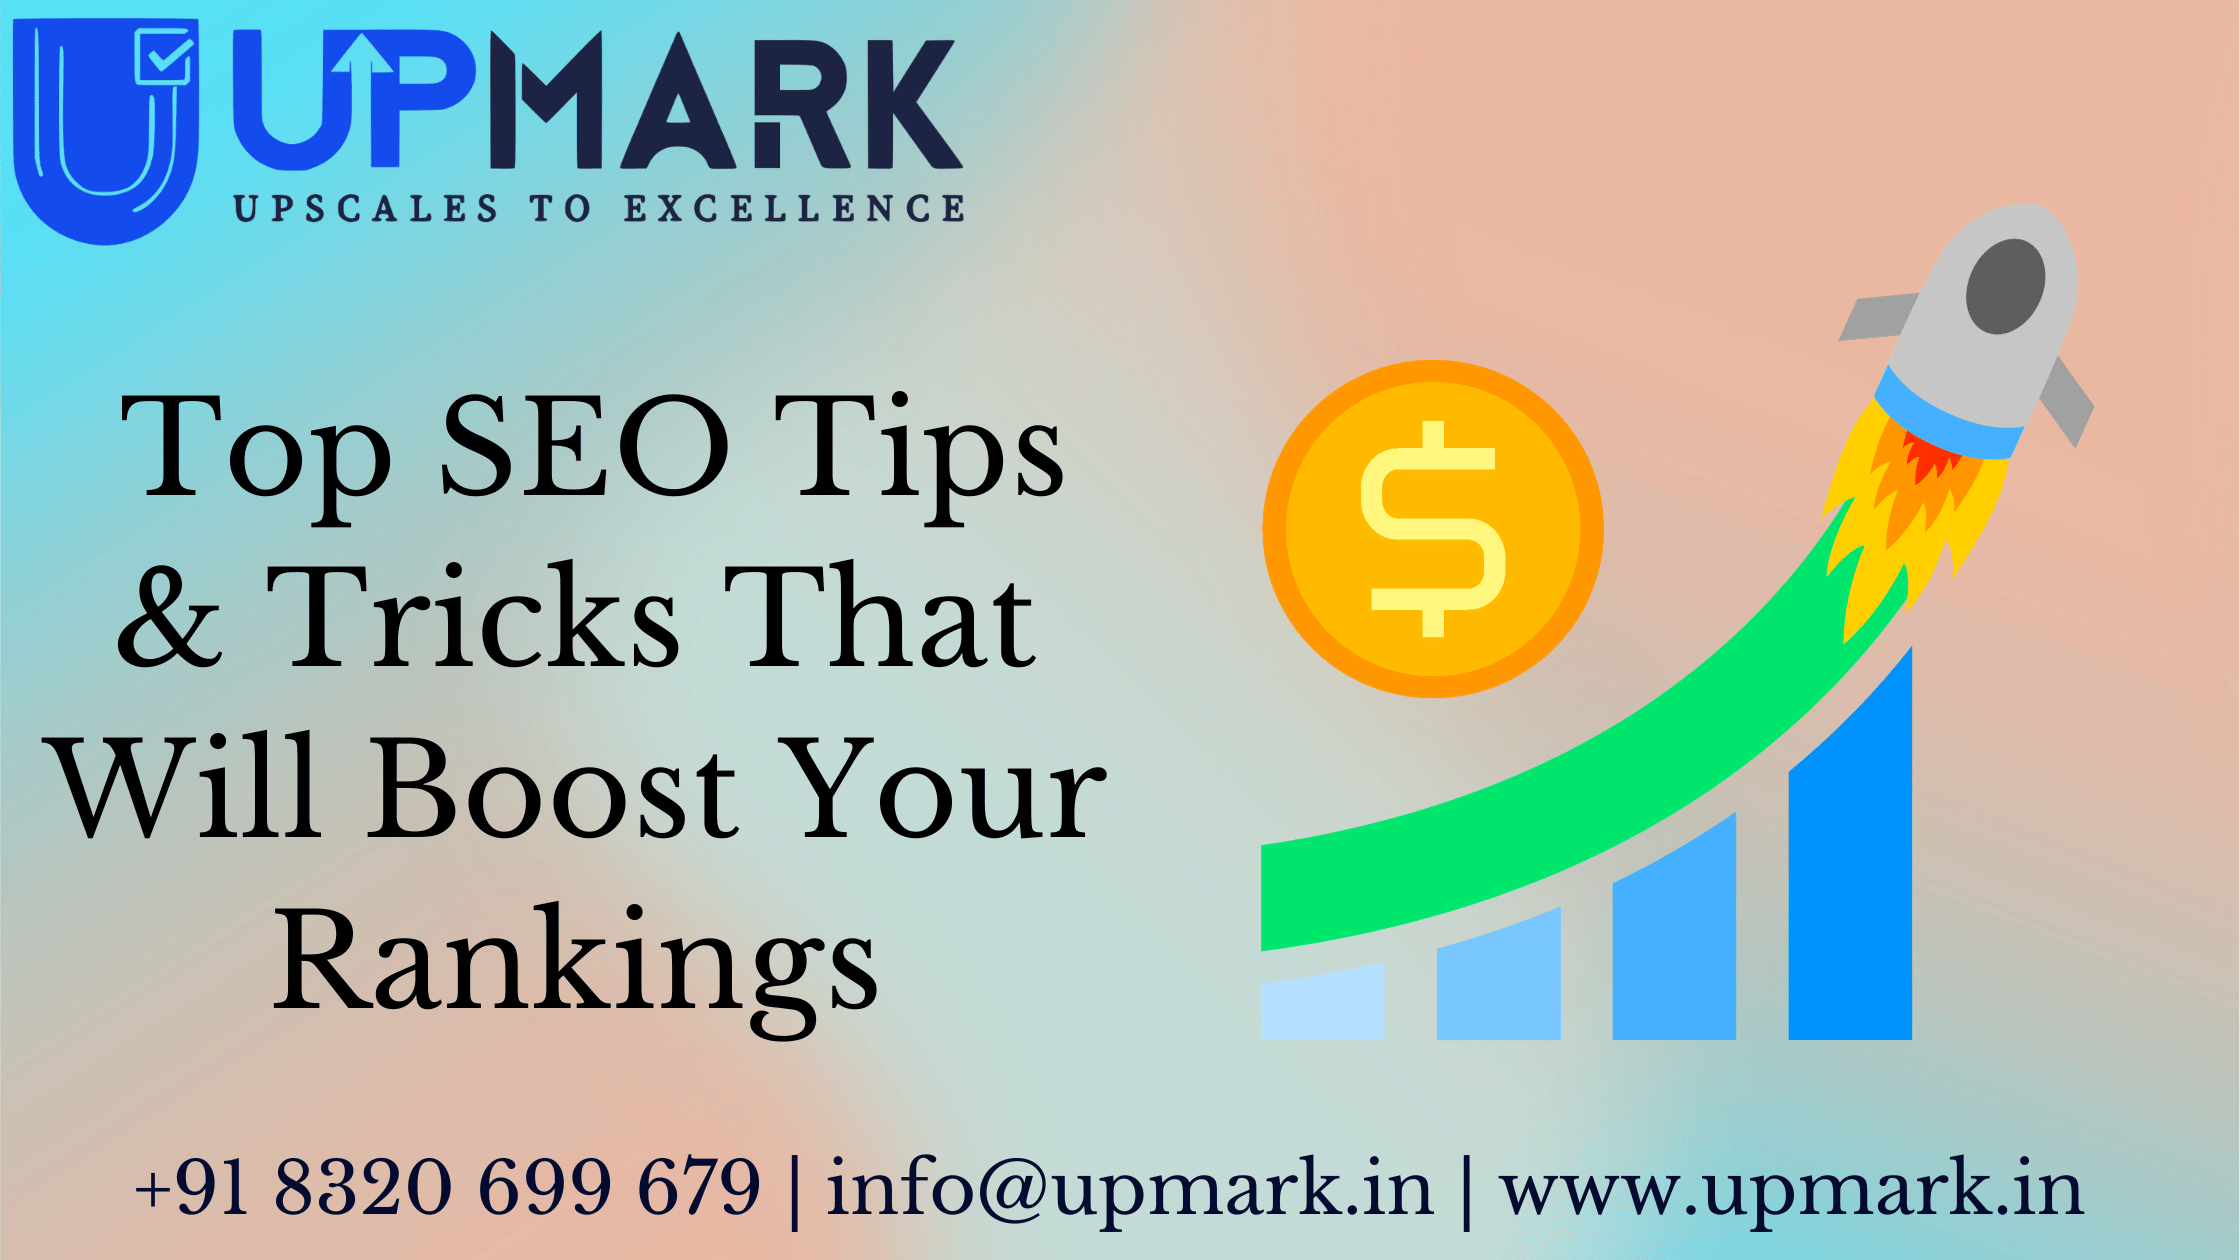 Top SEO Tips & Tricks That Will Boost Your Rankings